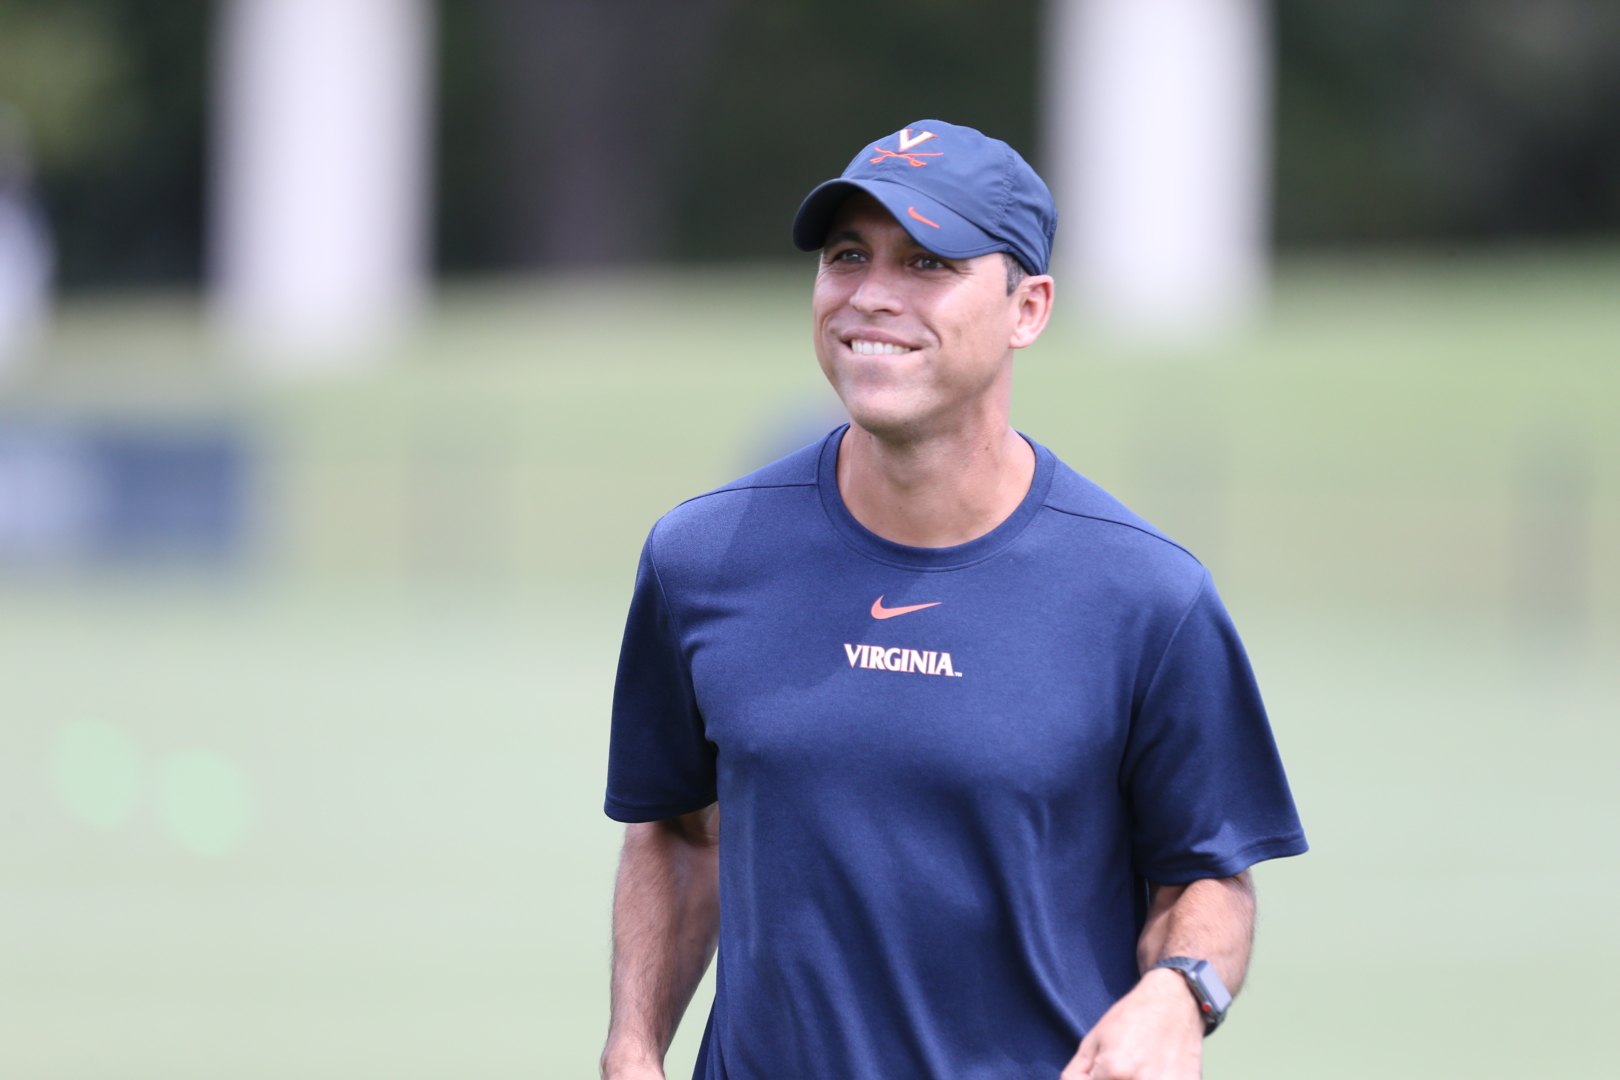 New UH soccer head coach Jaime Frias will begin his first season leading the Cougars on Aug. 14 at home against LSU. | Courtesy of Virginia Athletics